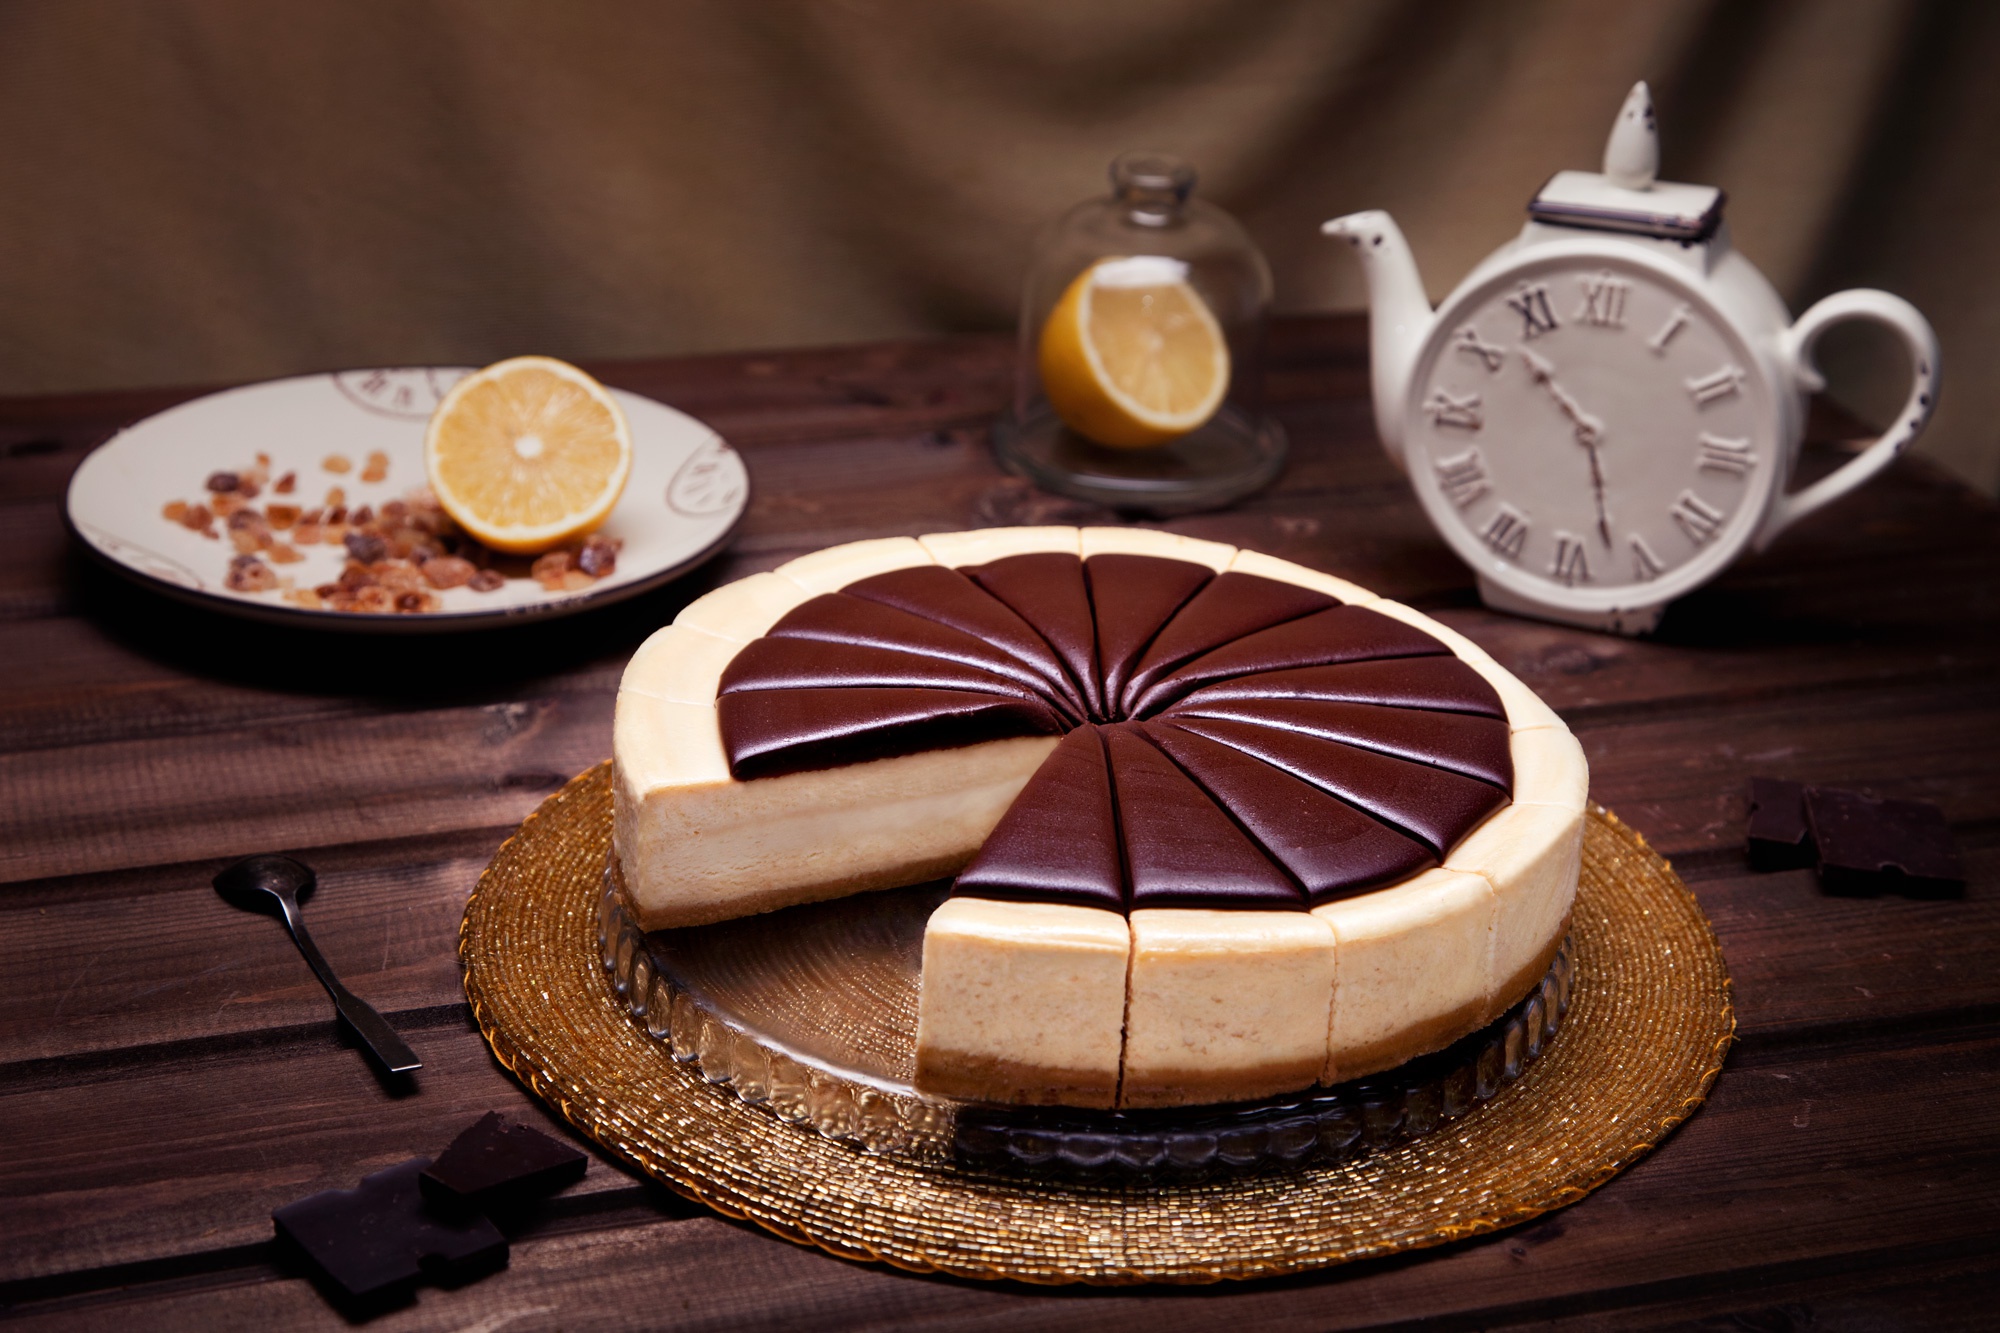 cheesecake, food, cake, pastry, still life